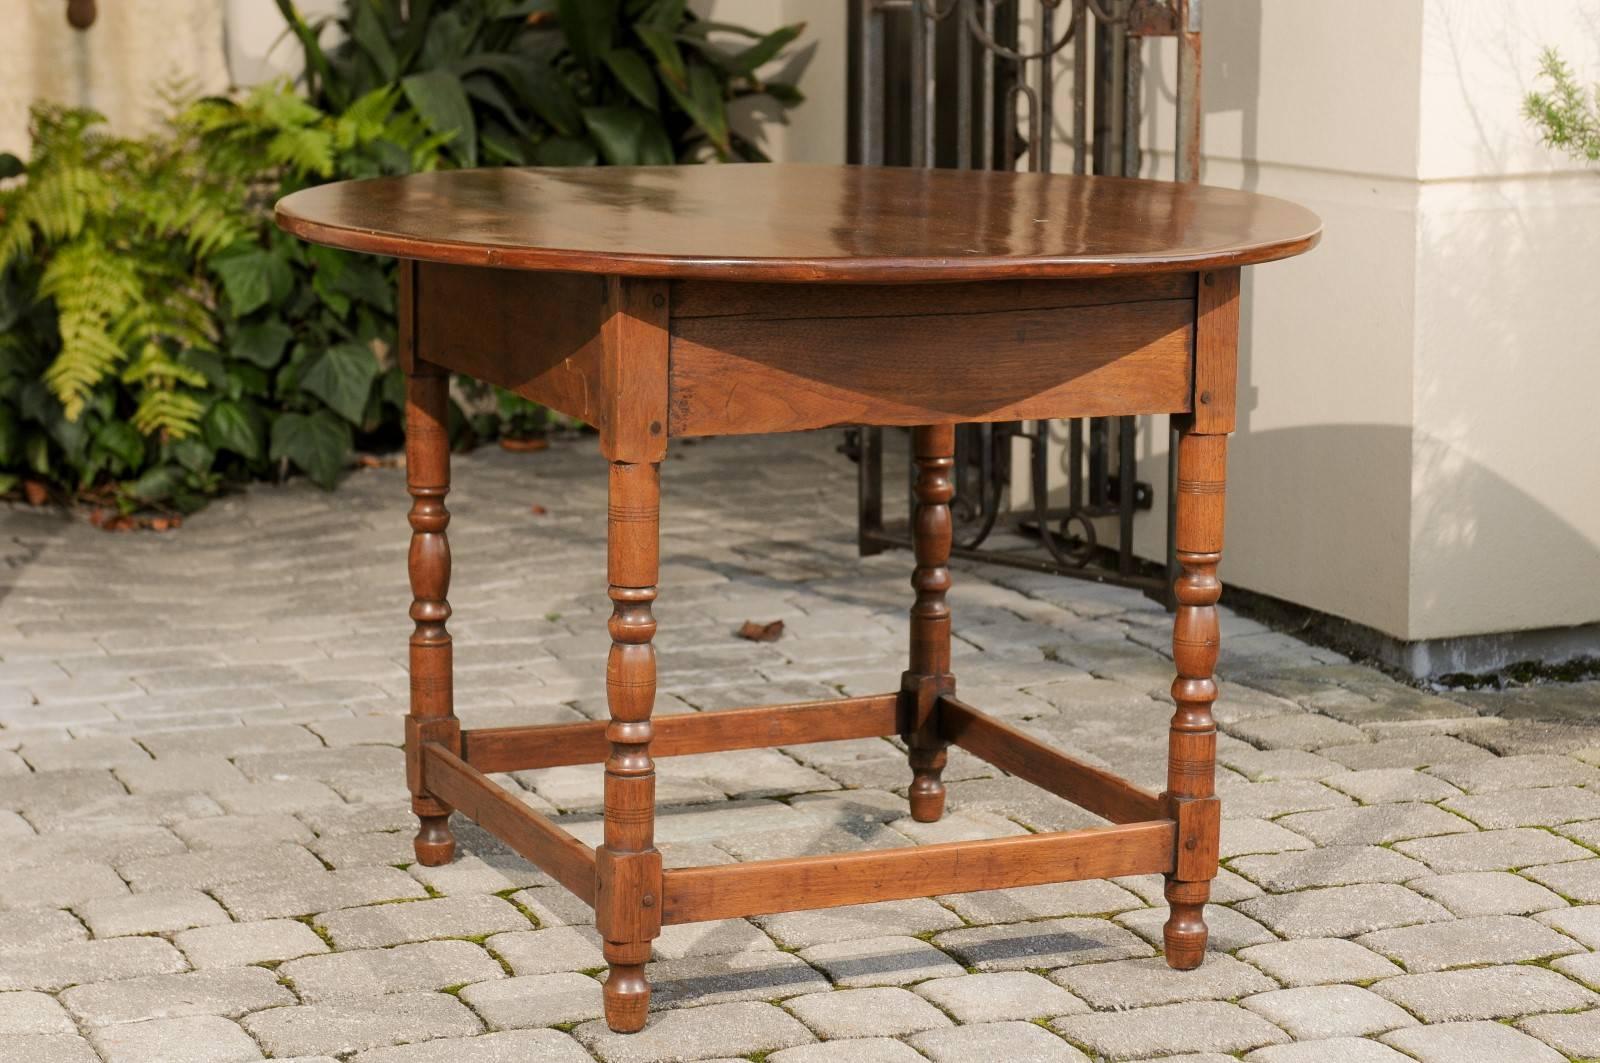 19th Century French Walnut Centre Table with Round Top and Turned Legs from the 1880s